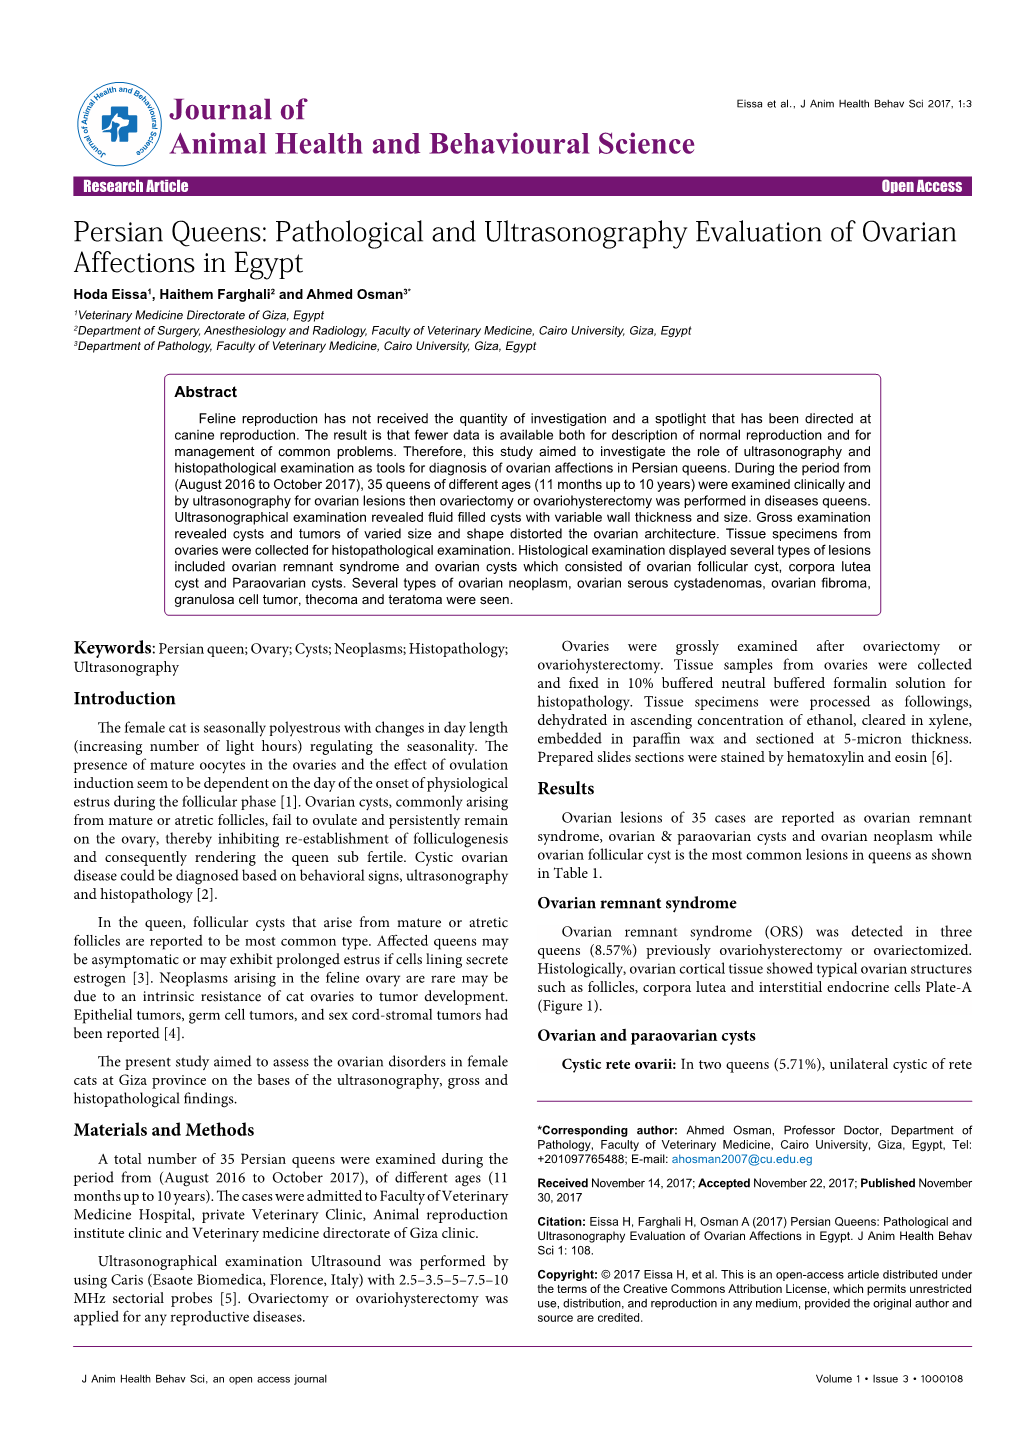 Pathological and Ultrasonography Evaluation of Ovarian Affections In